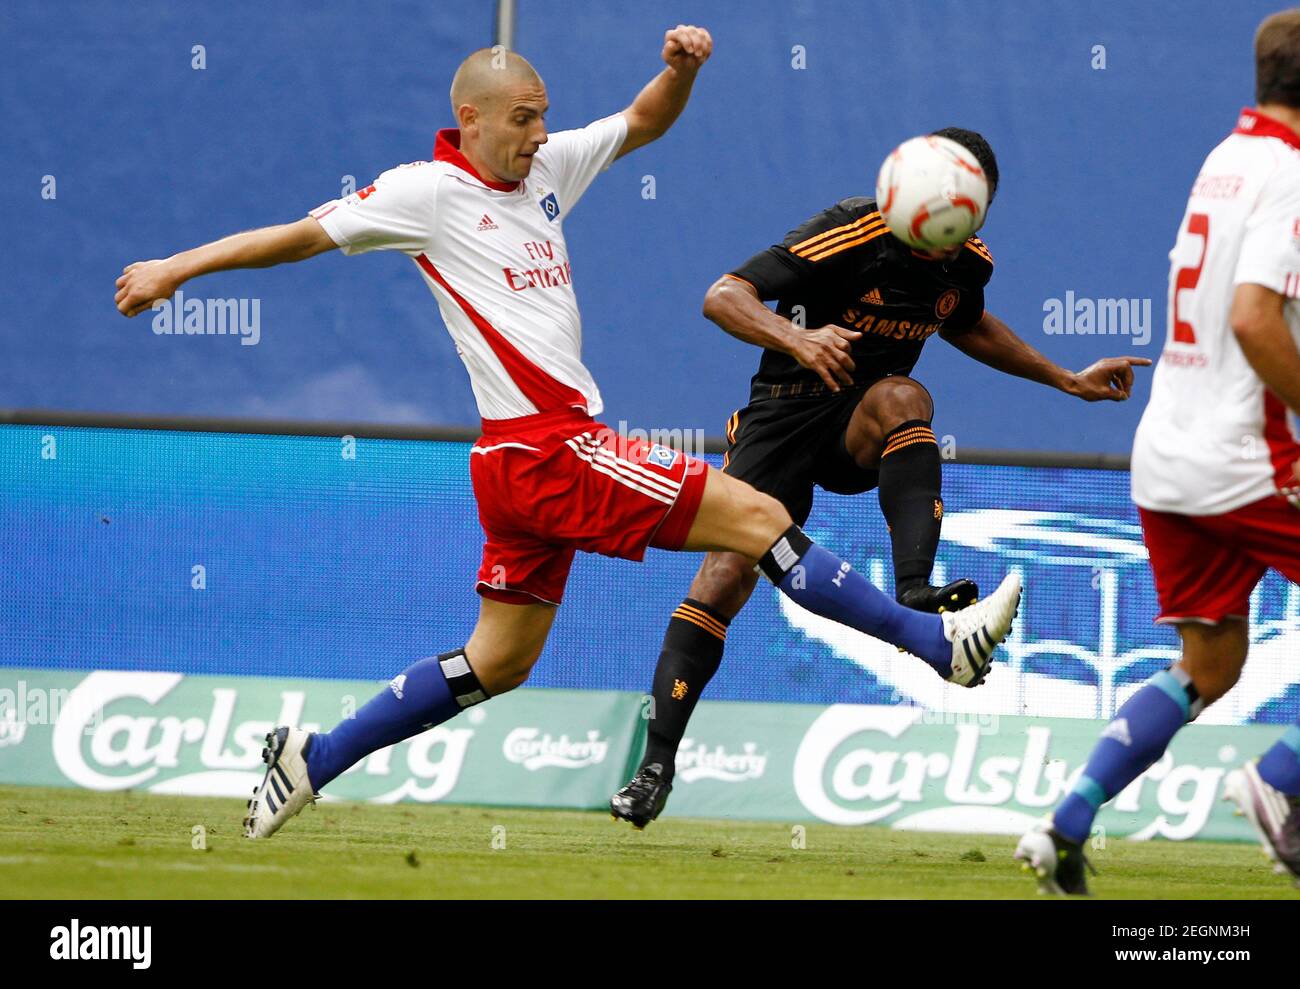 Football - SV Hamburg v Chelsea Pre Season Friendly - Imtech Arena,  Hamburg, Germany - 10/11 - 4/8/10 Chelsea's Florent Malouda (R) in action  Mandatory Credit: Action Images / Juergen Tap Livepic Stock Photo - Alamy